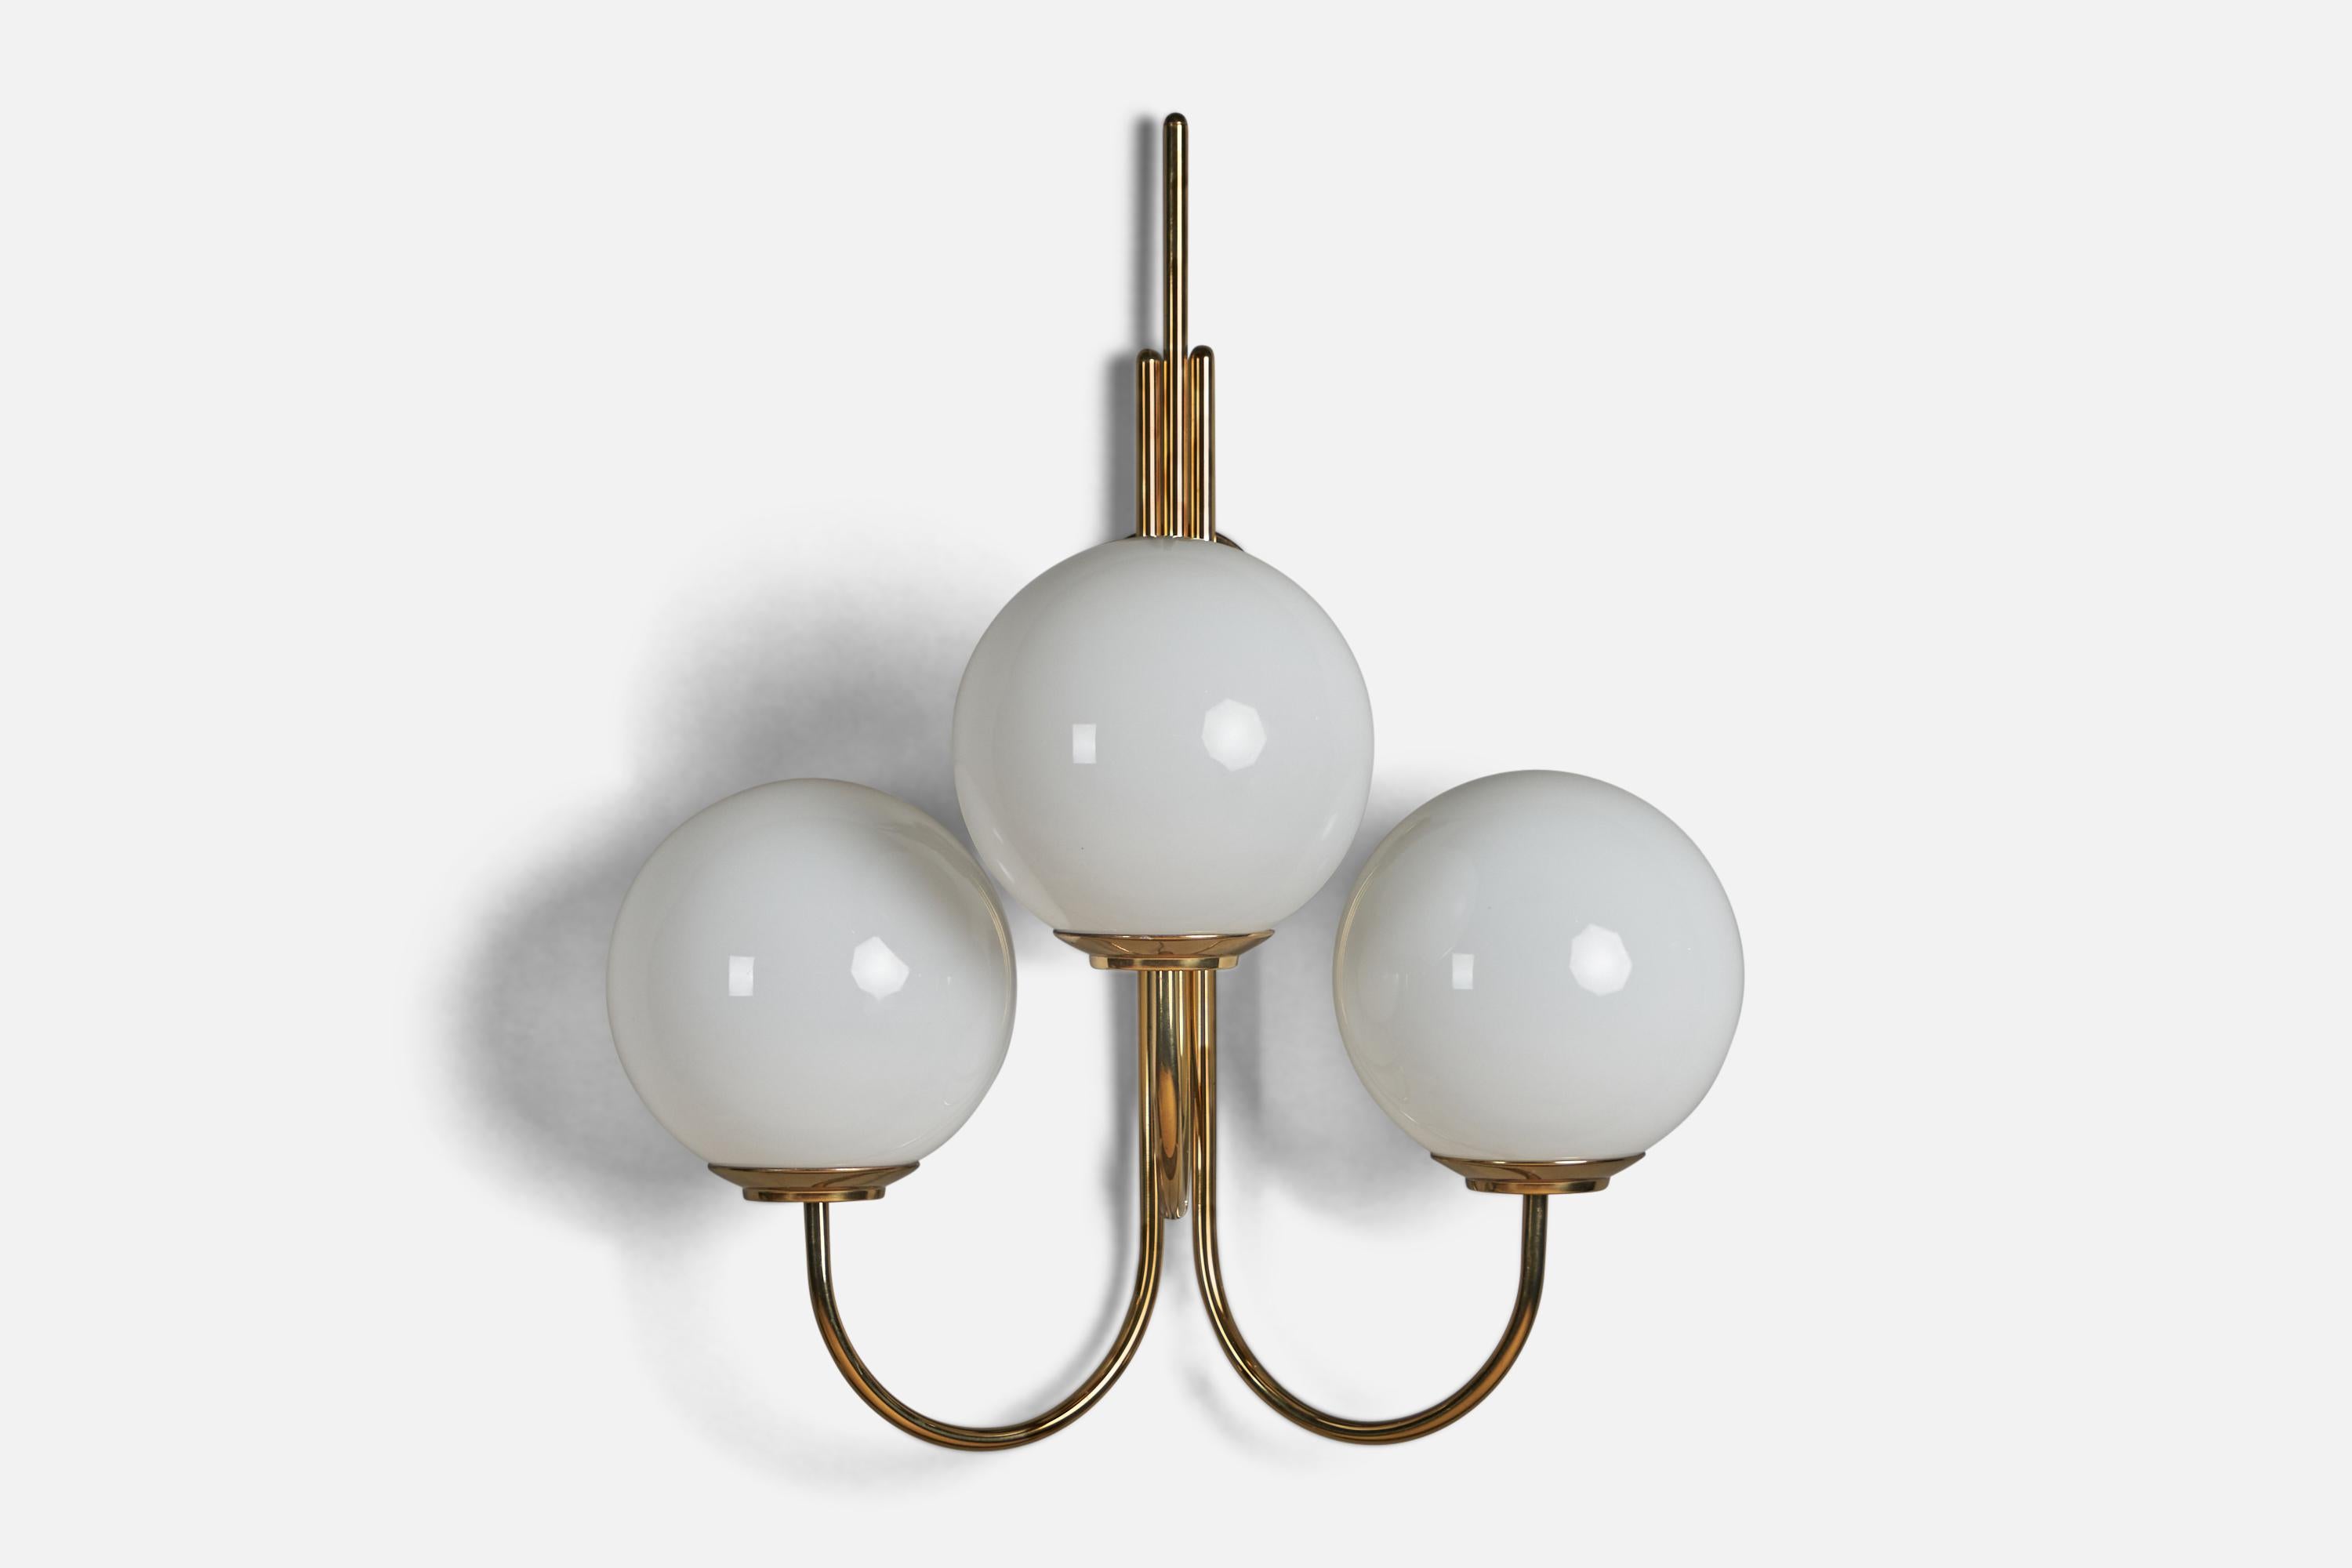 A sizeable brass and glass wall light, designed by Luigi Caccia Dominioni and produced by Azucena, Italy, 1950s.

Overall Dimensions (inches): 33